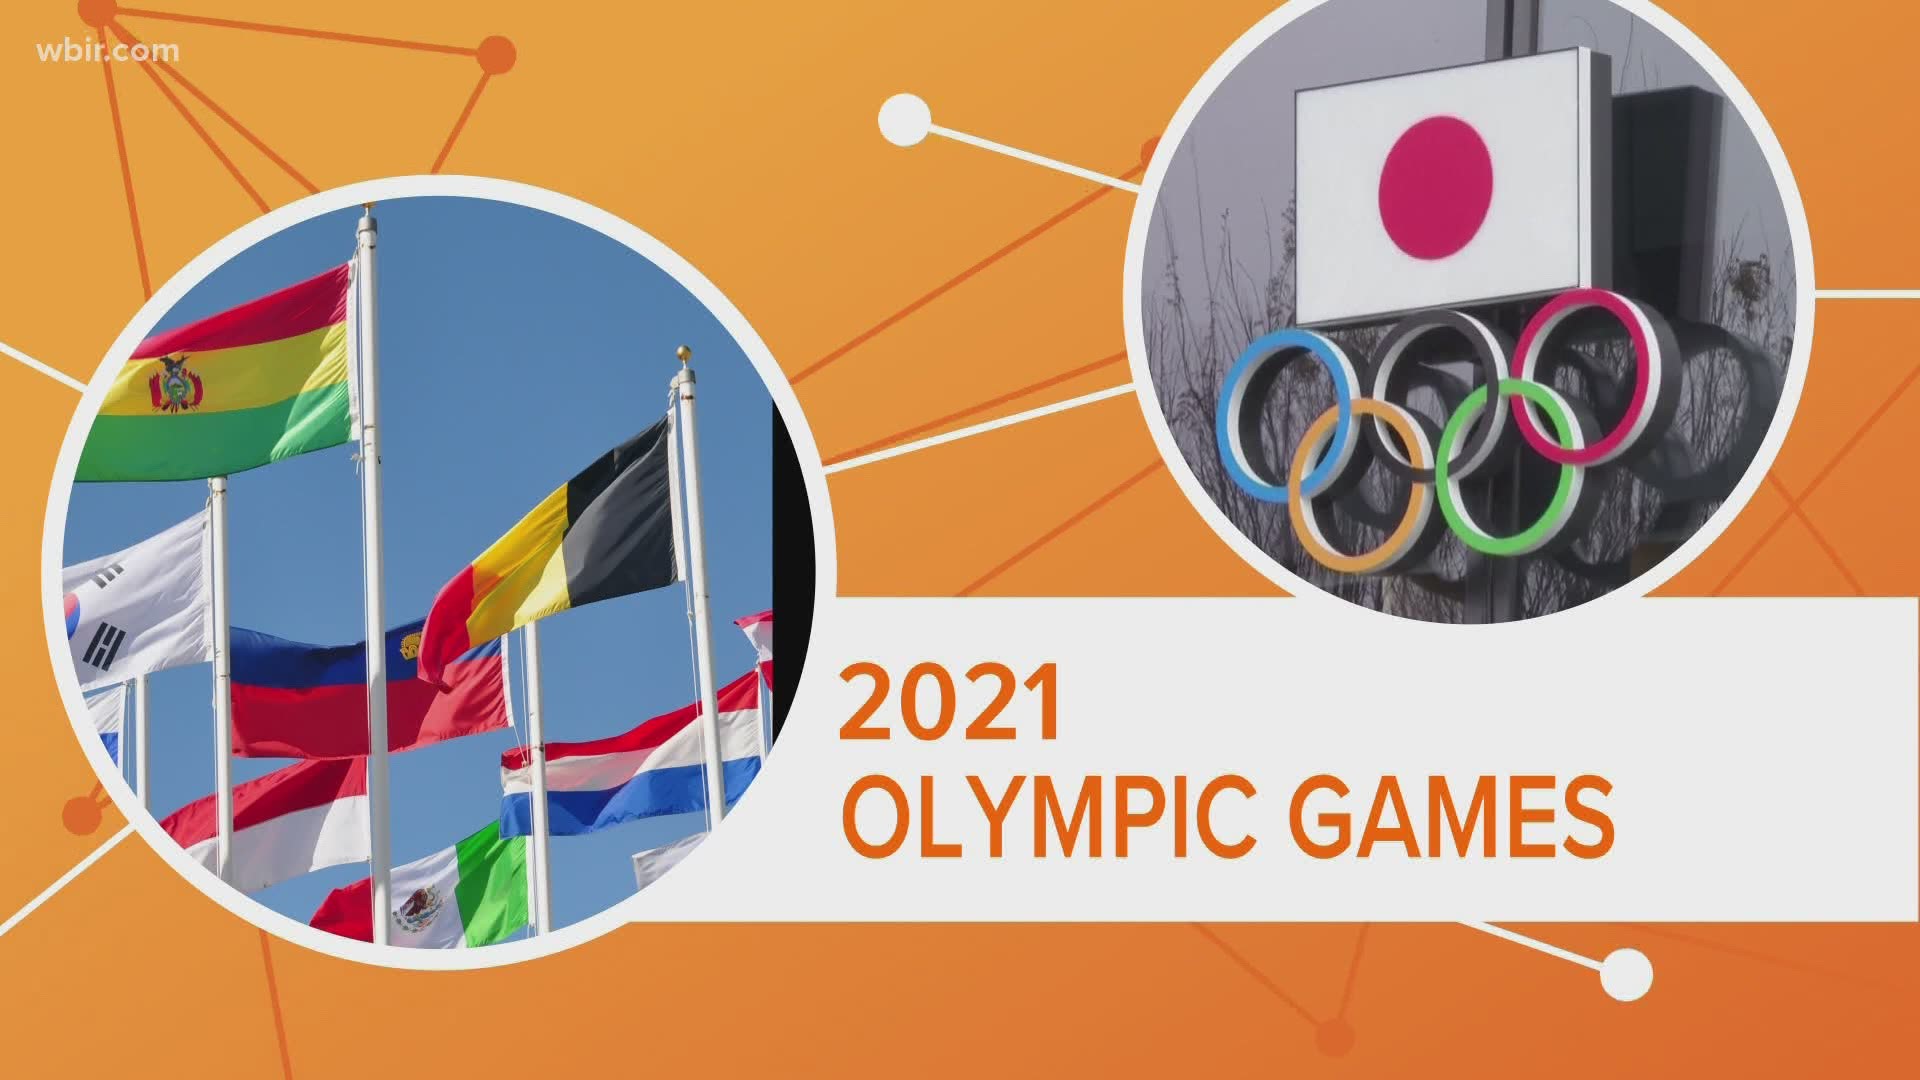 We're exactly one year away from the 2021 summer games in Tokyo but some worry a year delay still won't be enough to hold the games safely.